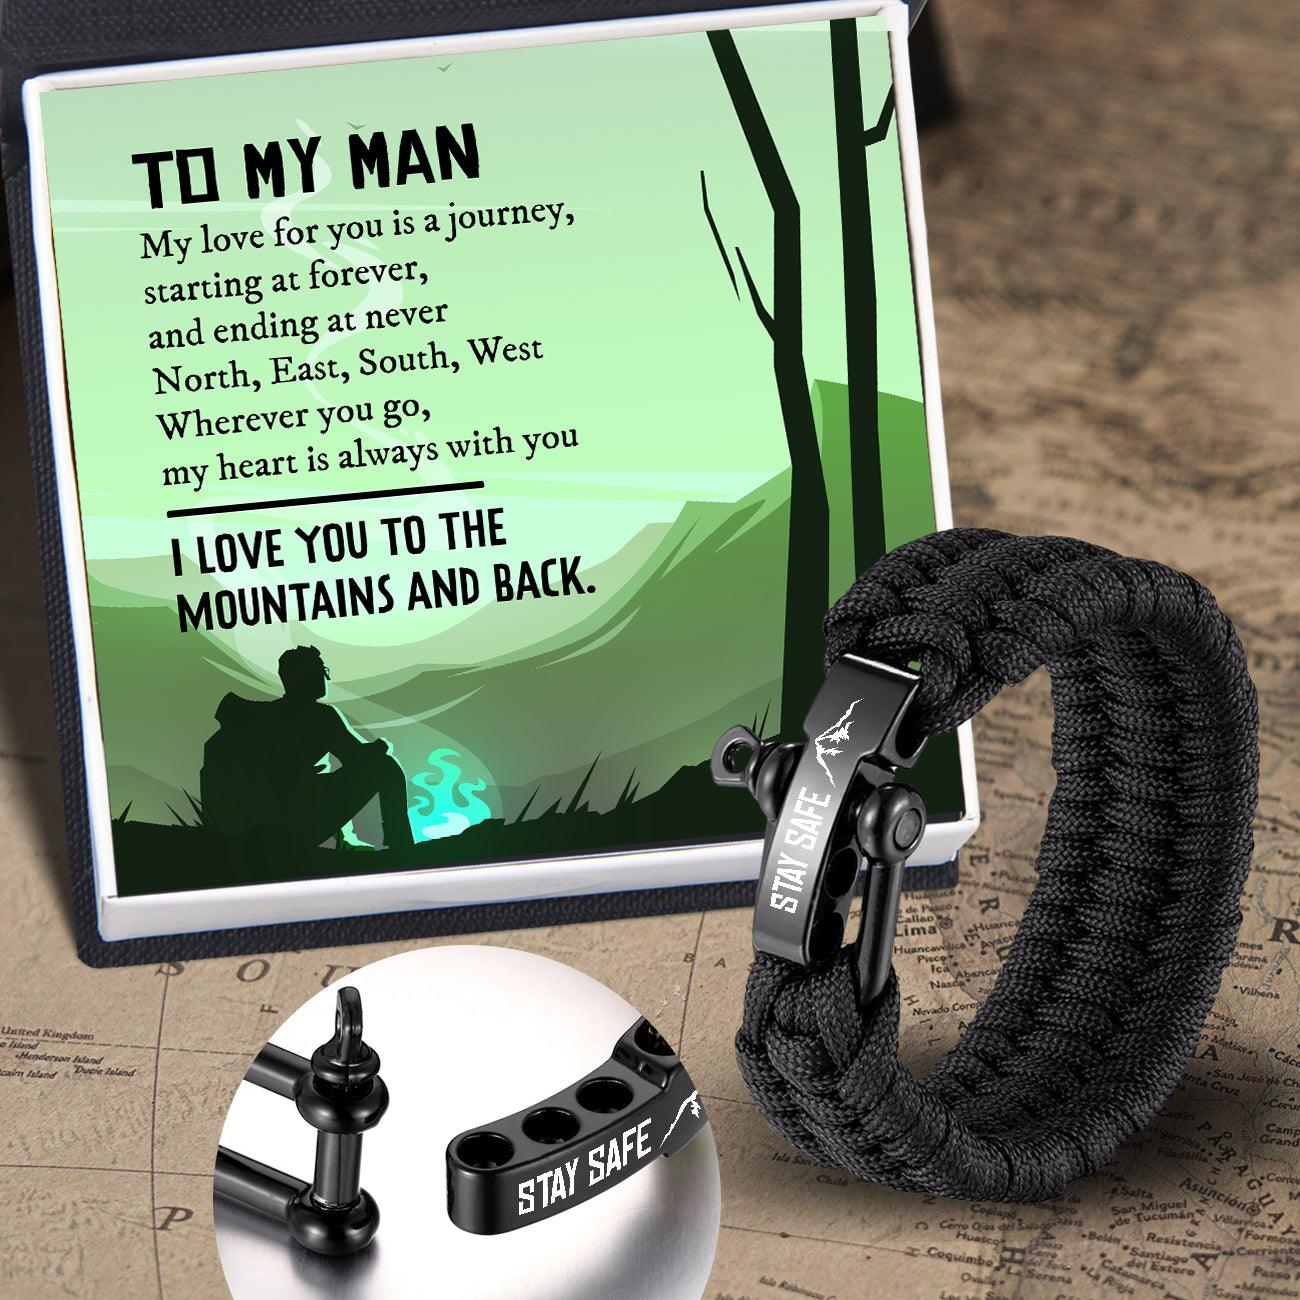 Paracord Rope Bracelet - Hiking - To My Man - Stay Safe - Augbxa26001 - Gifts Holder